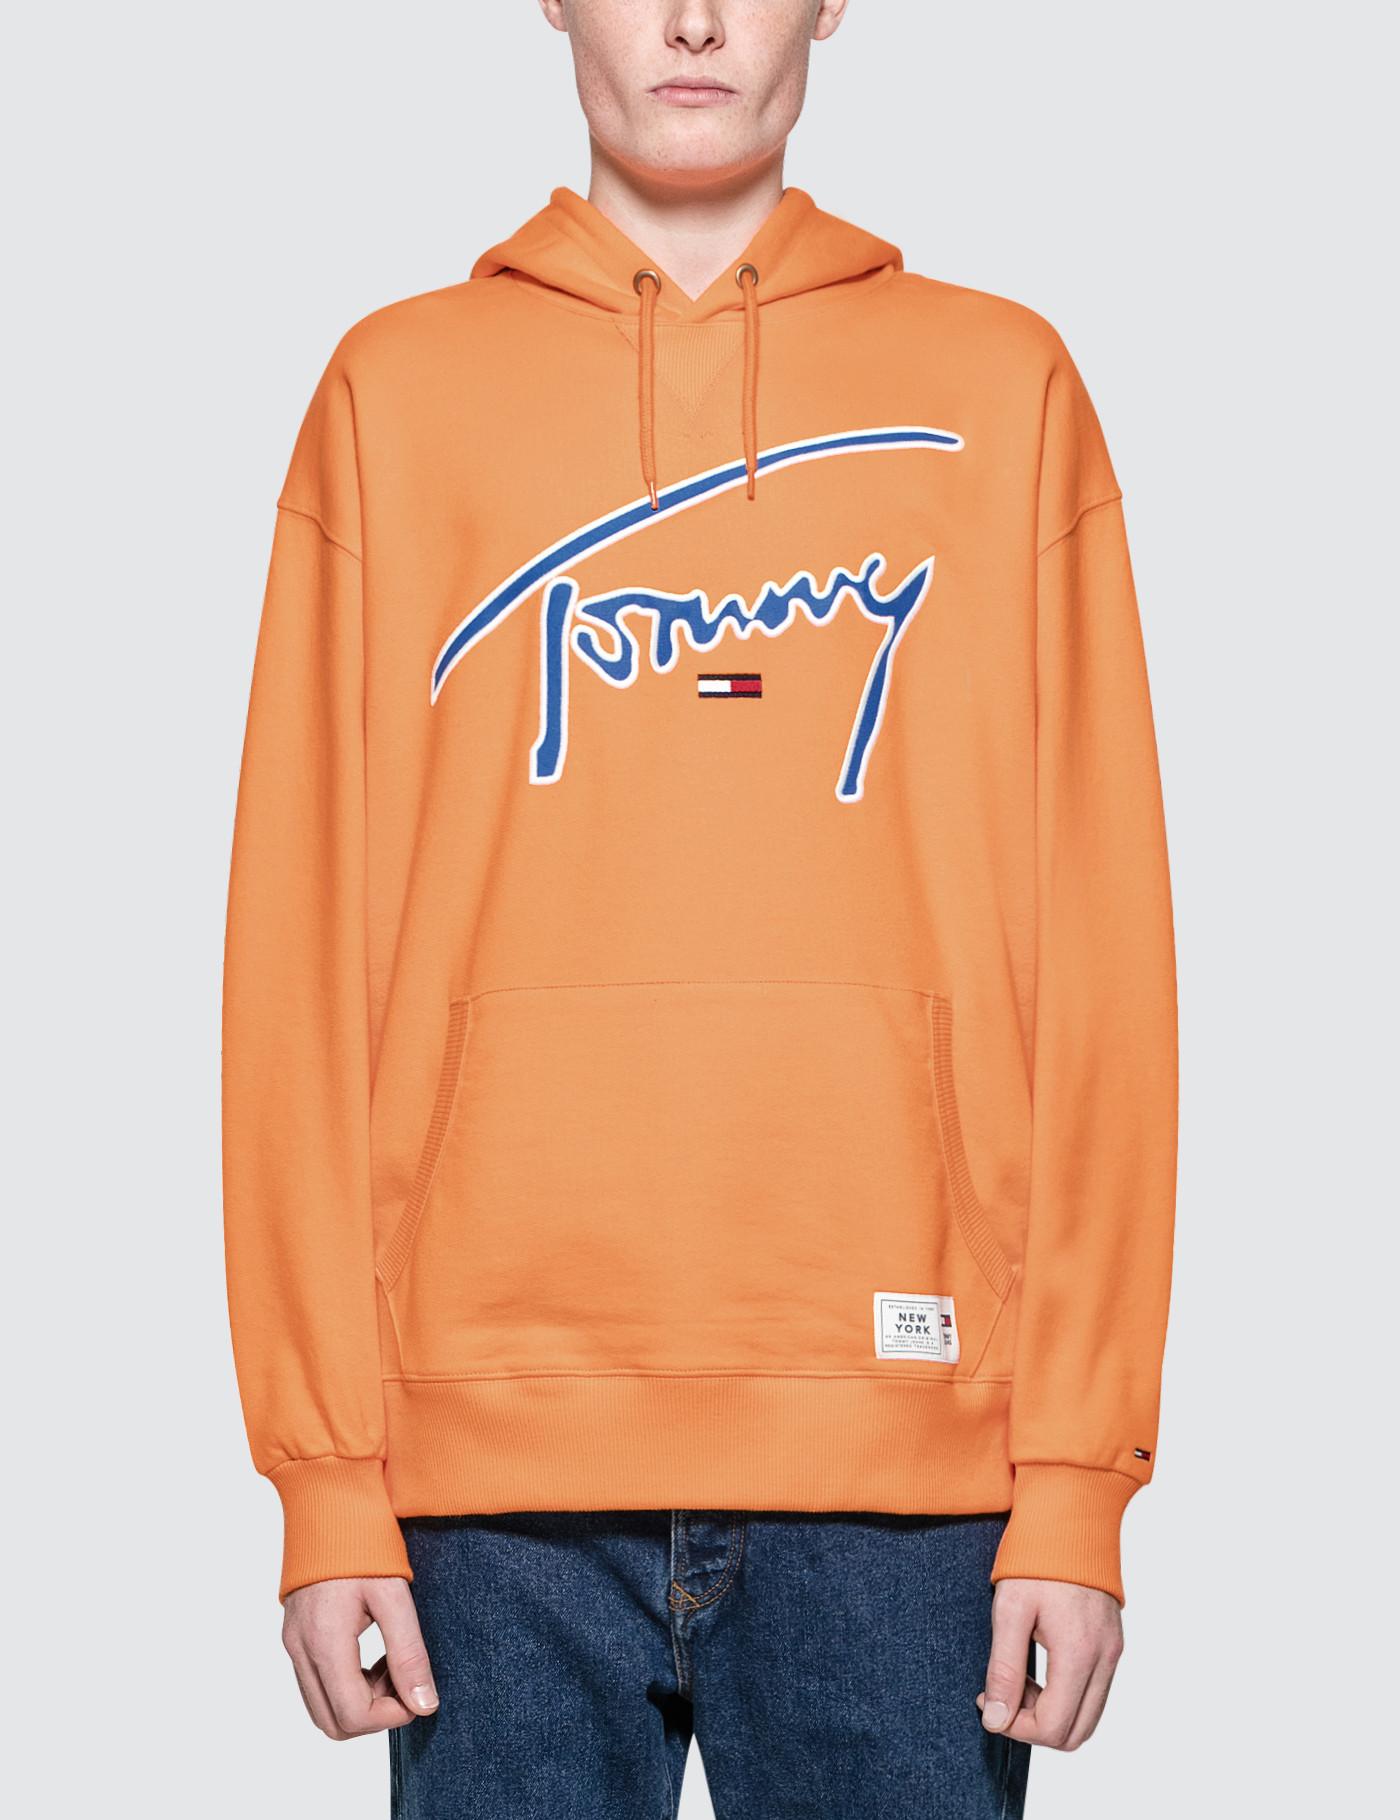 Lyst - Tommy Hilfiger Tommy Signature Hoodie in Orange for Men